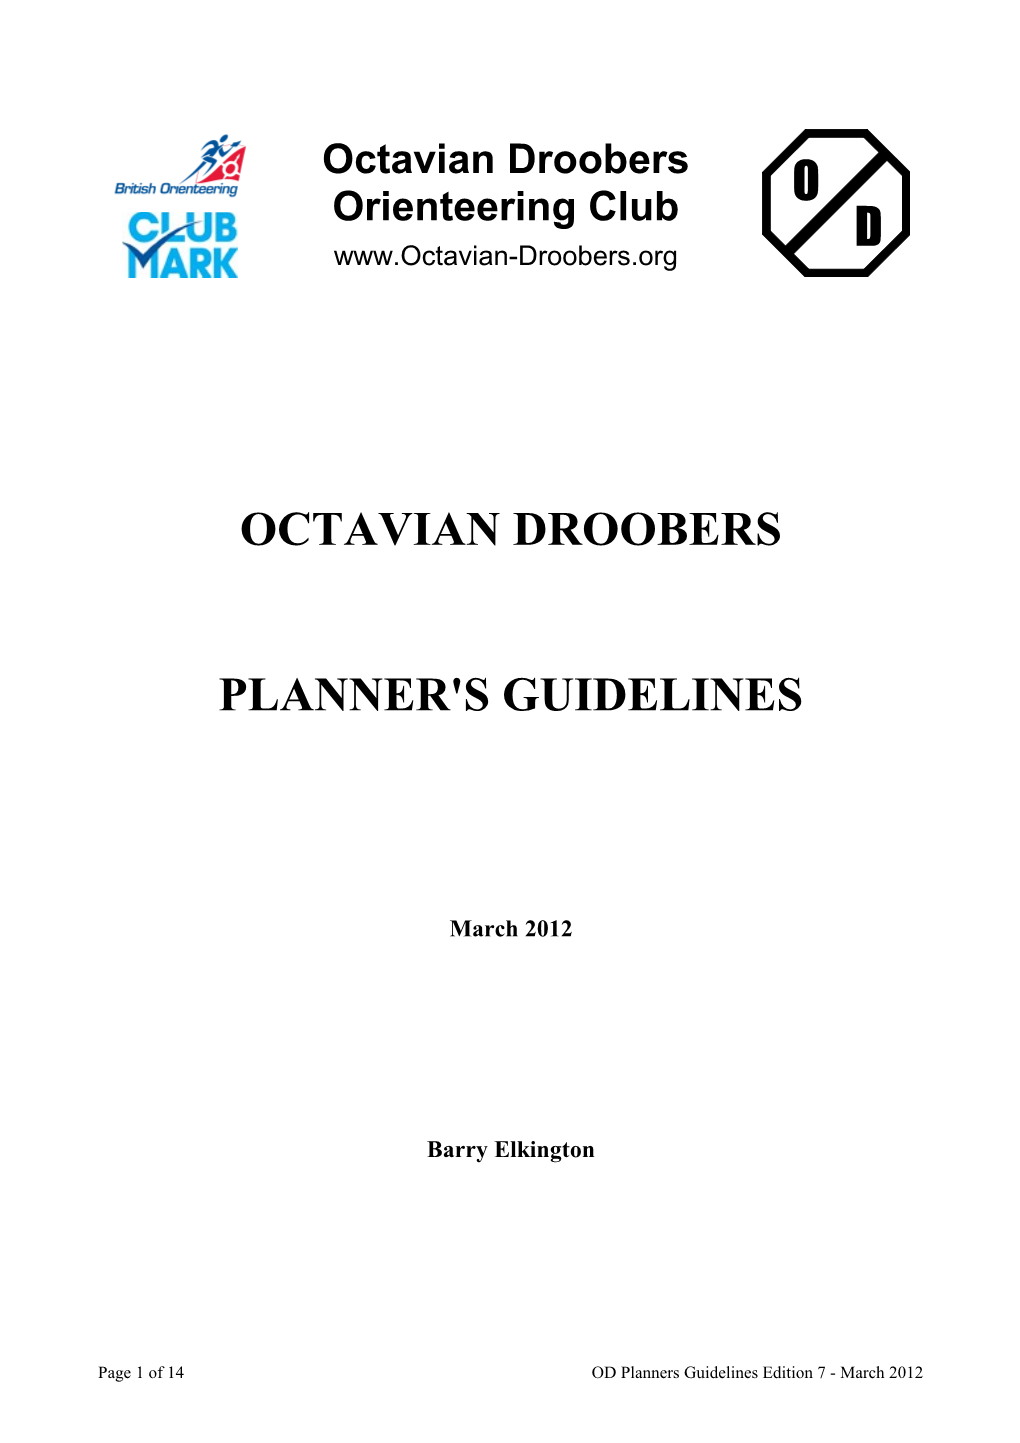 Planner's Guidelines